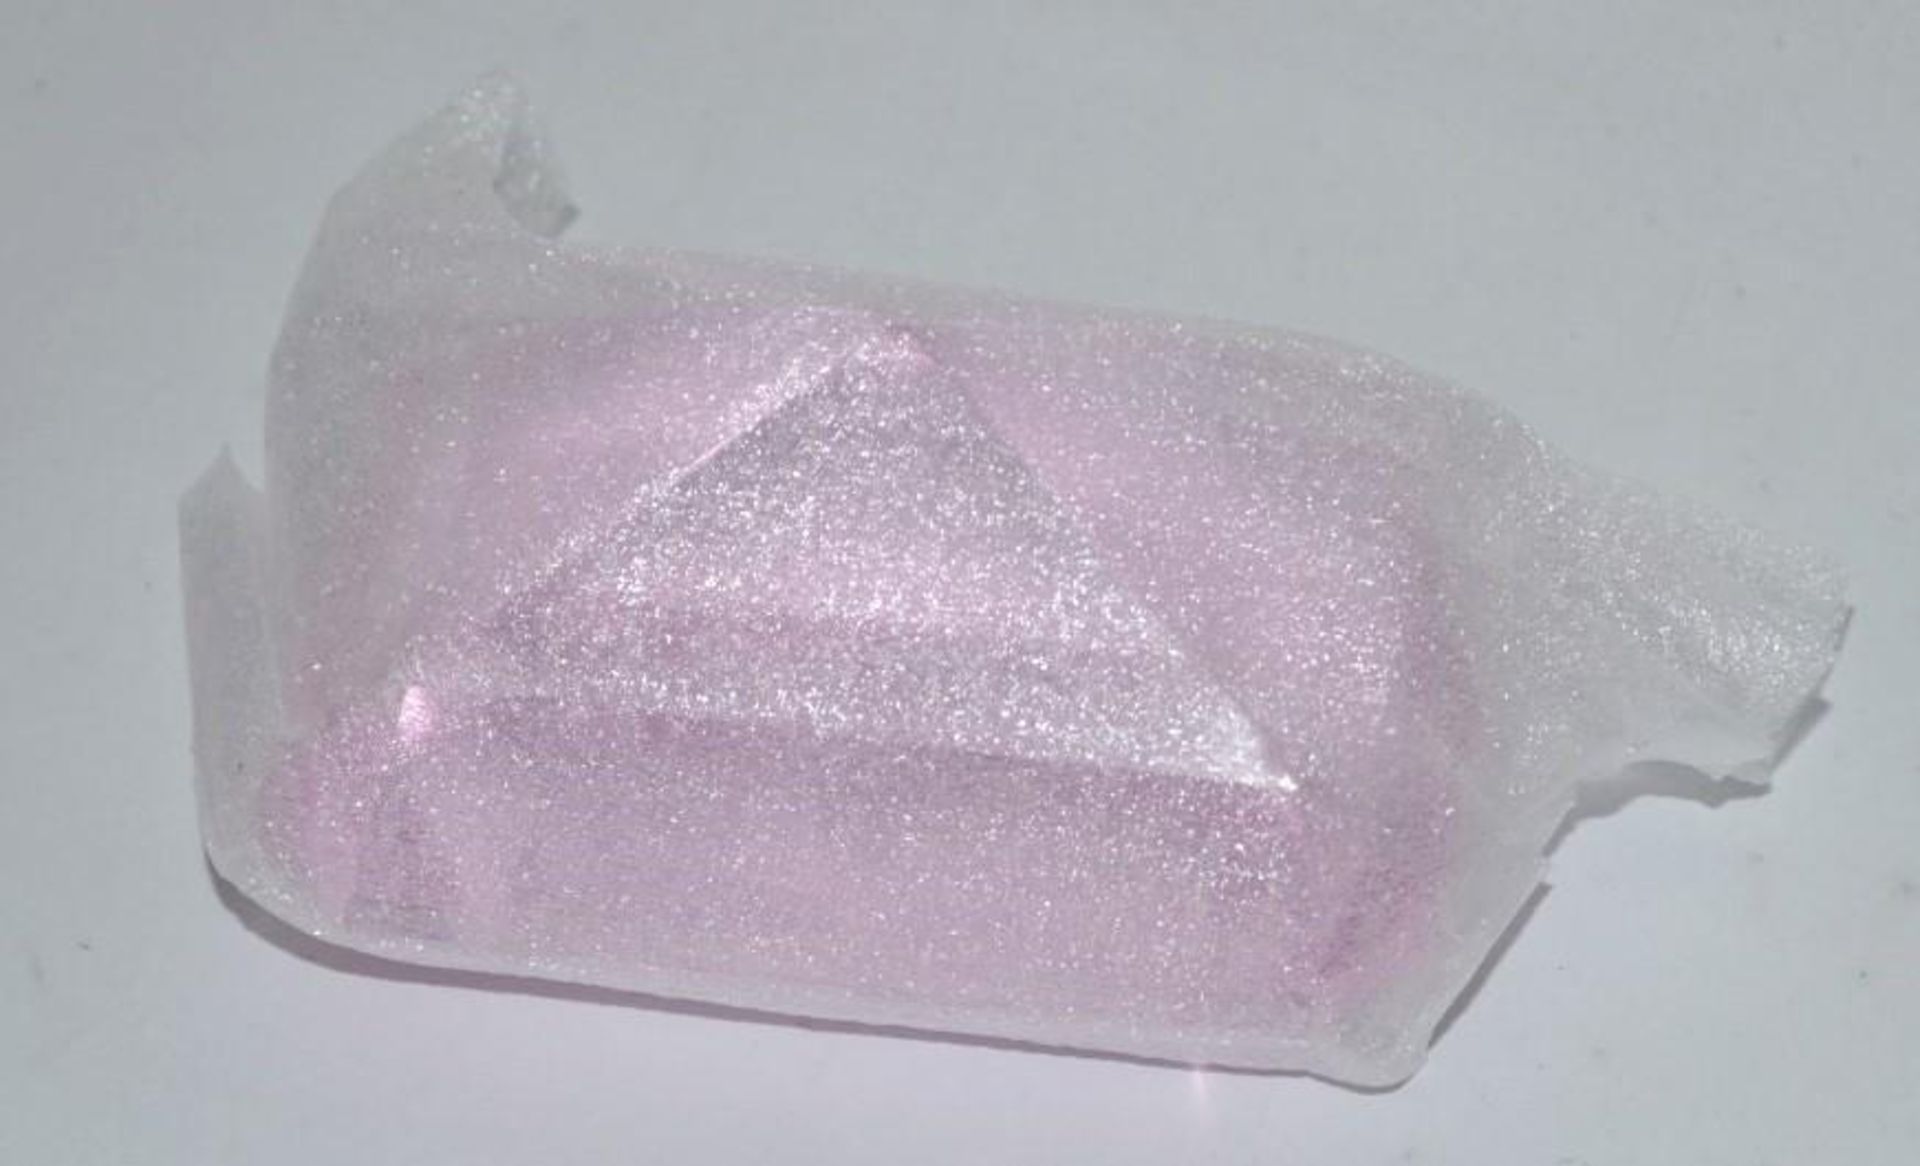 10 x ICE London Emerald Shaped Crystal Paperweight - Colour: Pink - 100mm In Diameter - New / Unused - Image 2 of 4